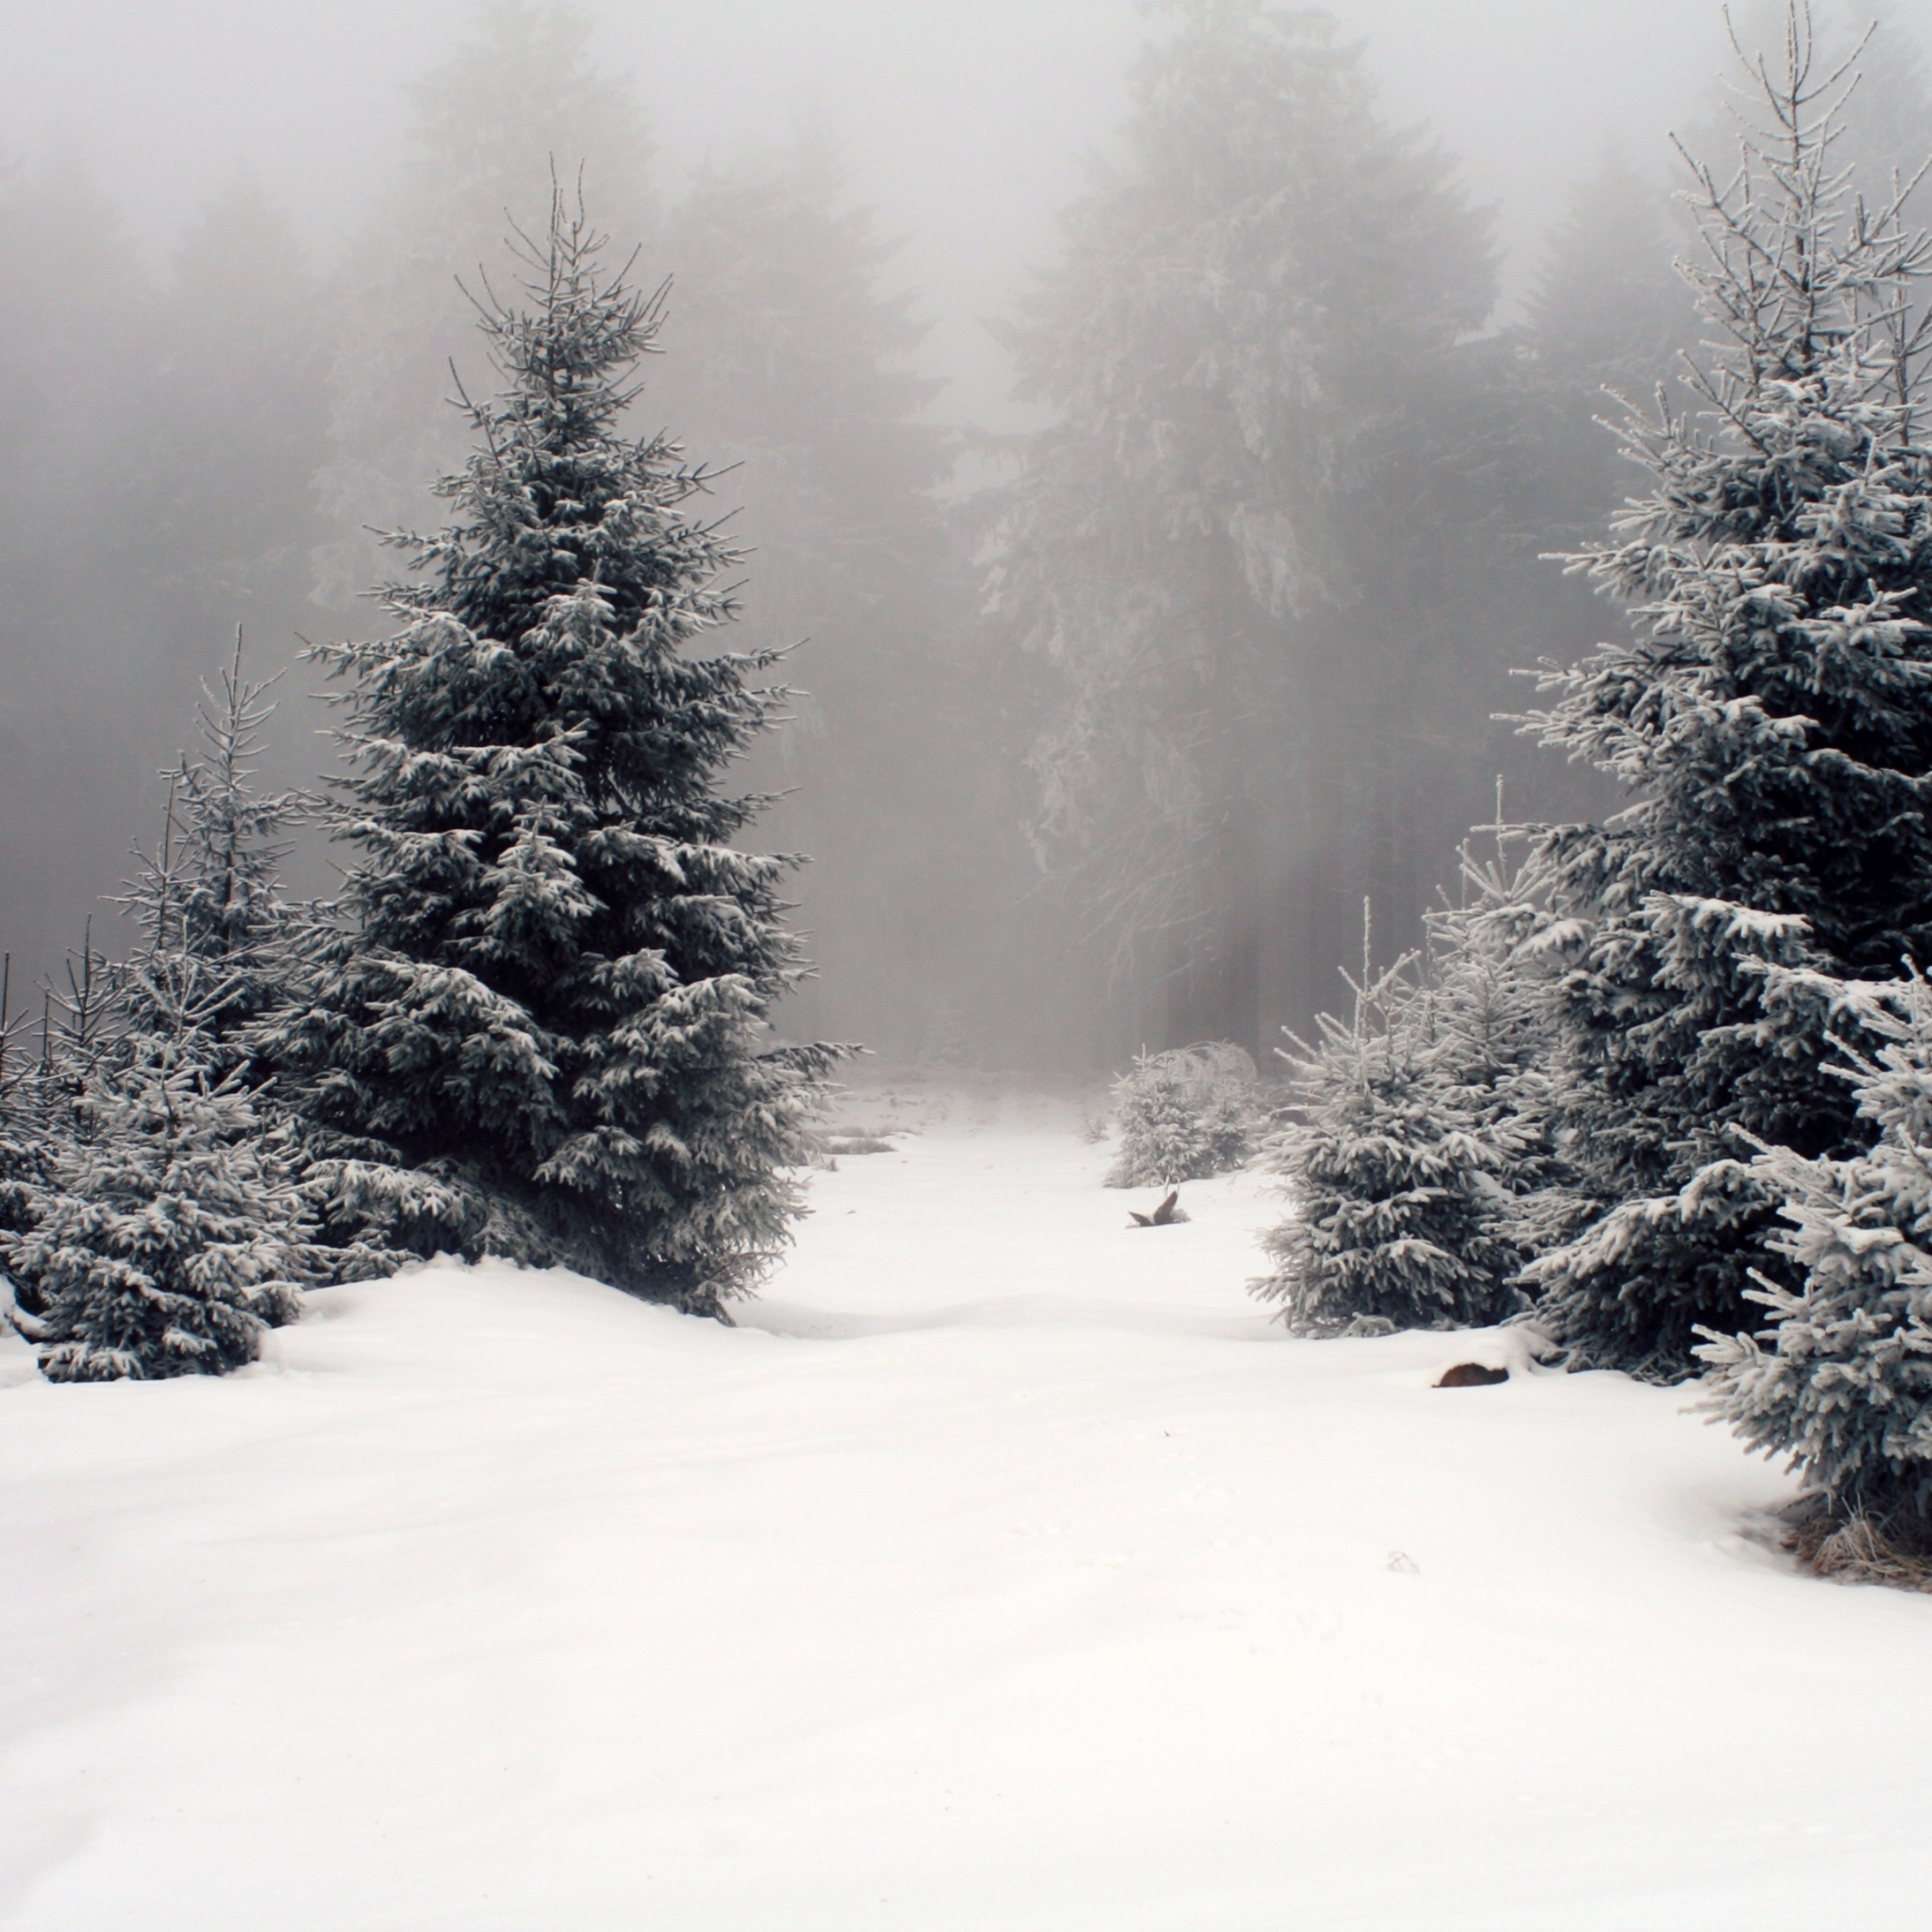 Calm Scenery In The Forest With Fog And A Lot Of Snow